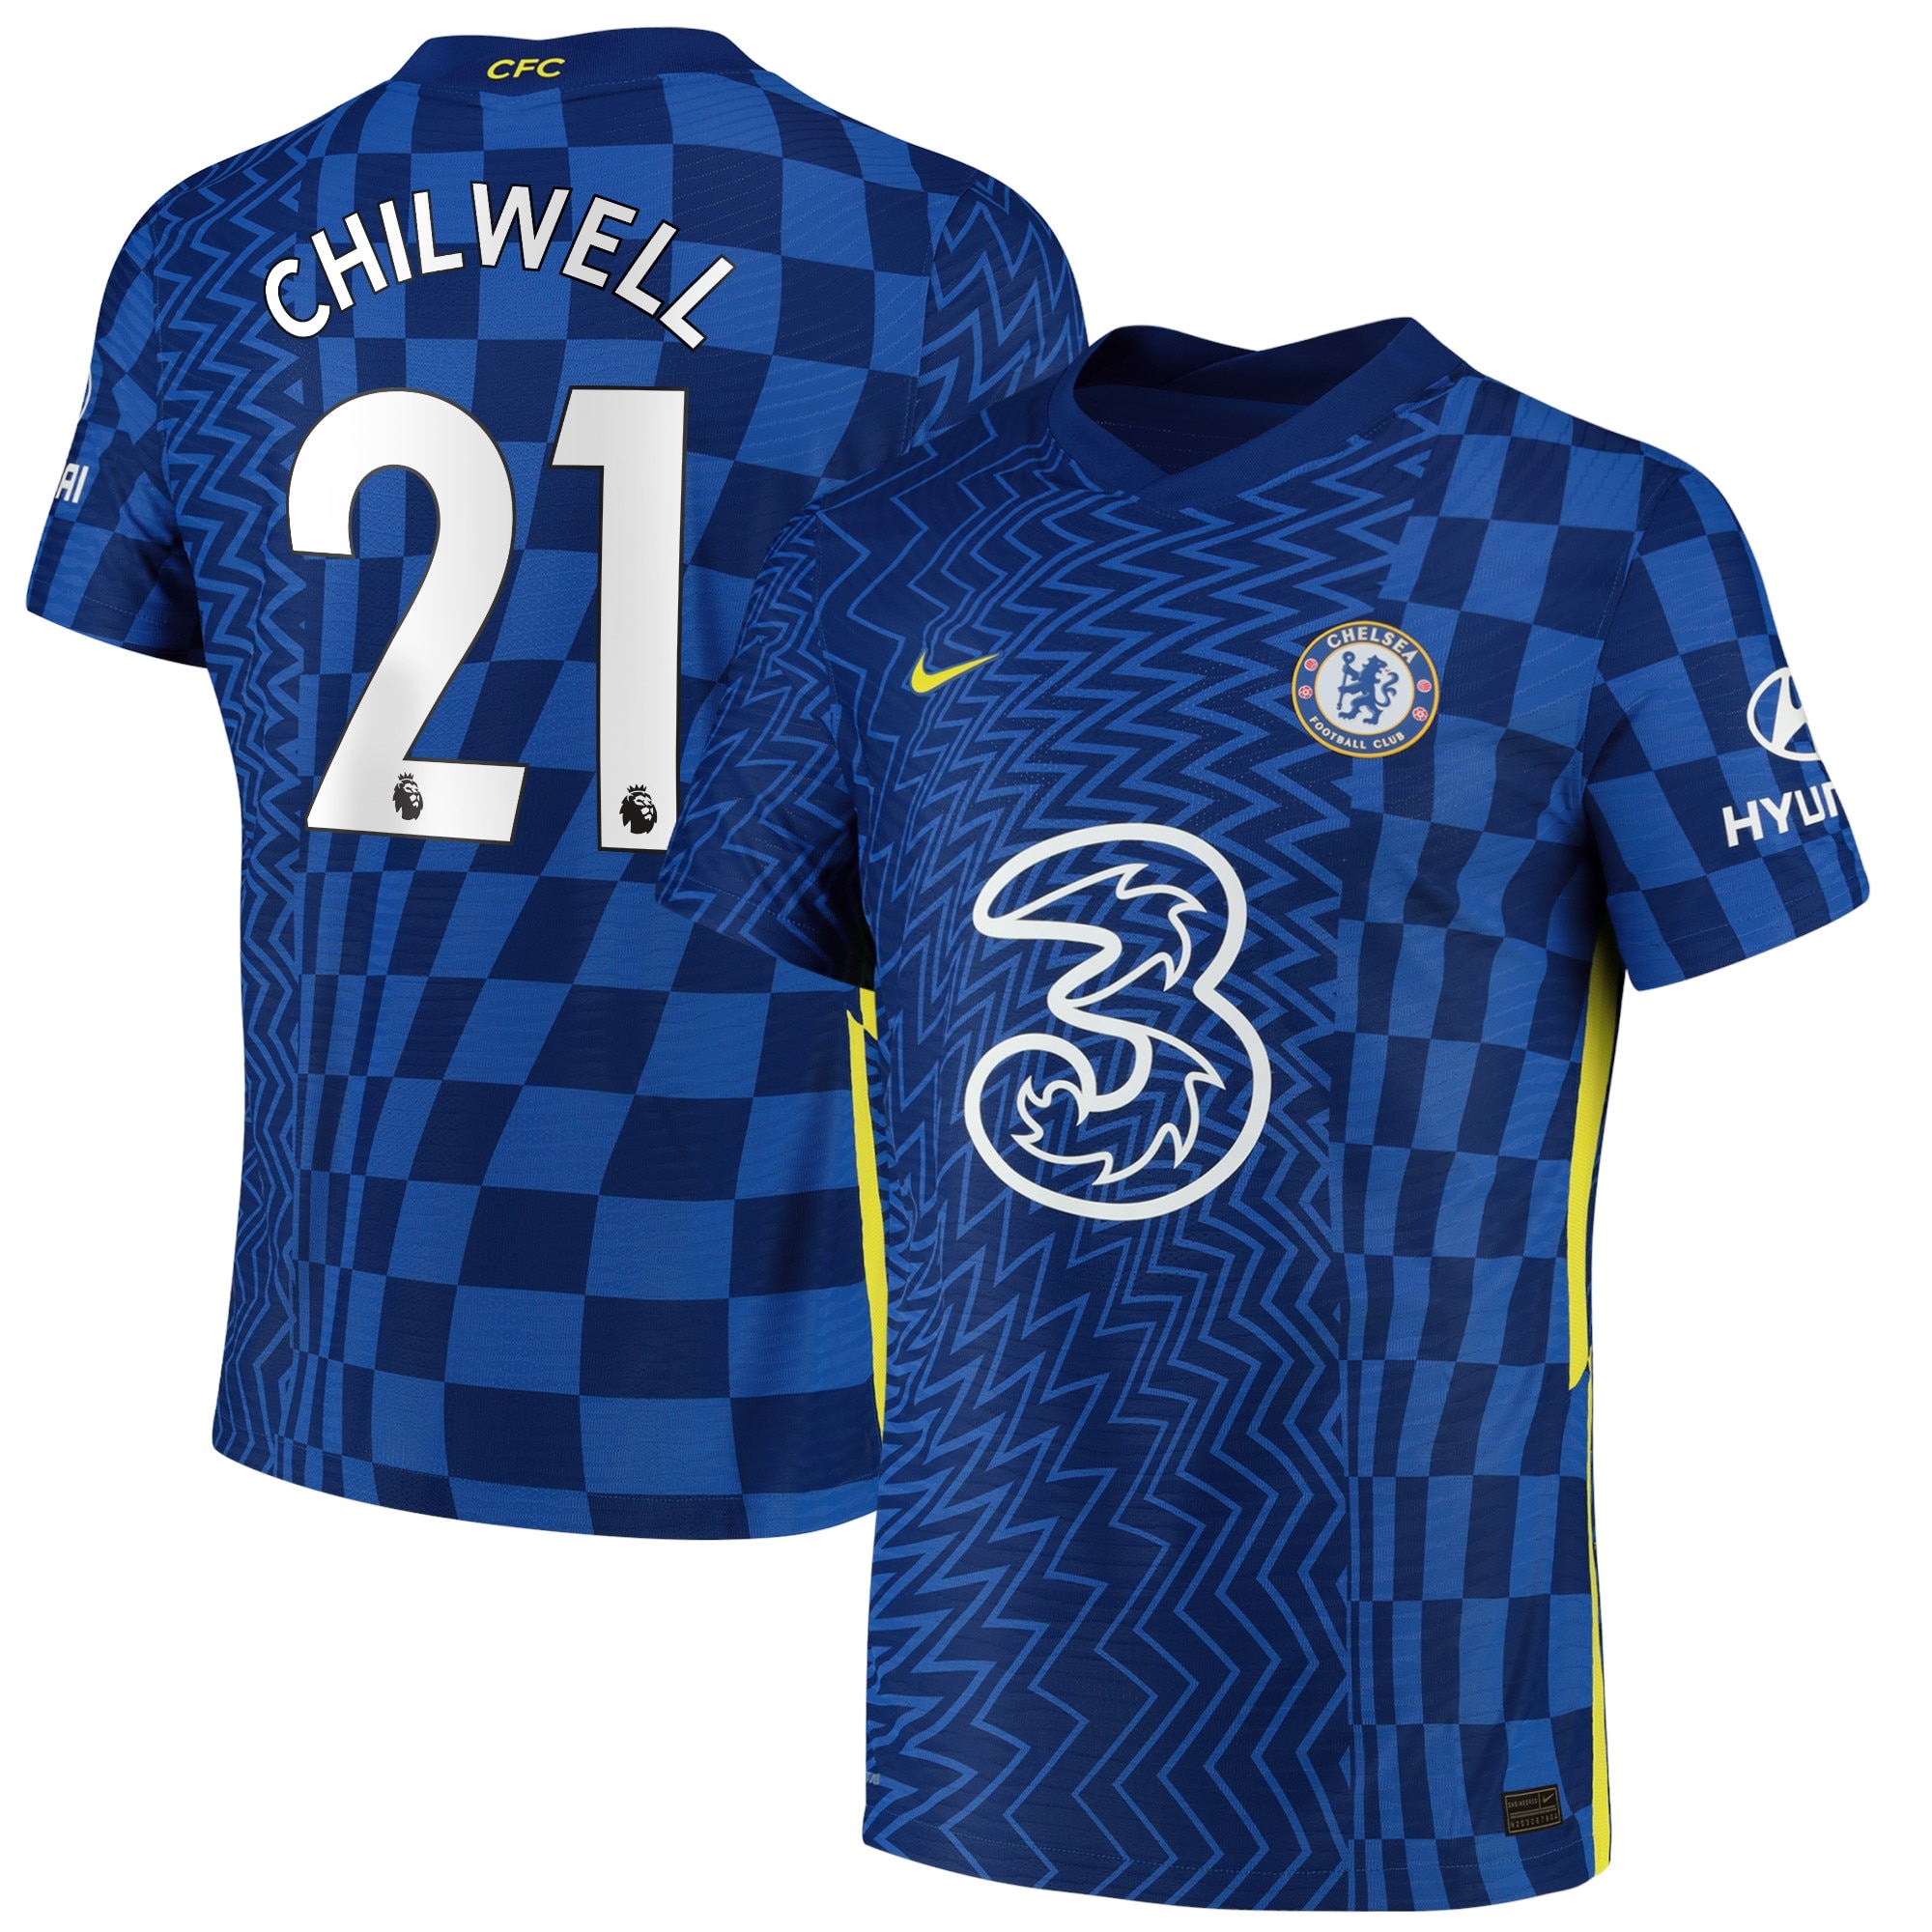 Chelsea Home Vapor Match Shirt 2021-22 with Chilwell 21 printing